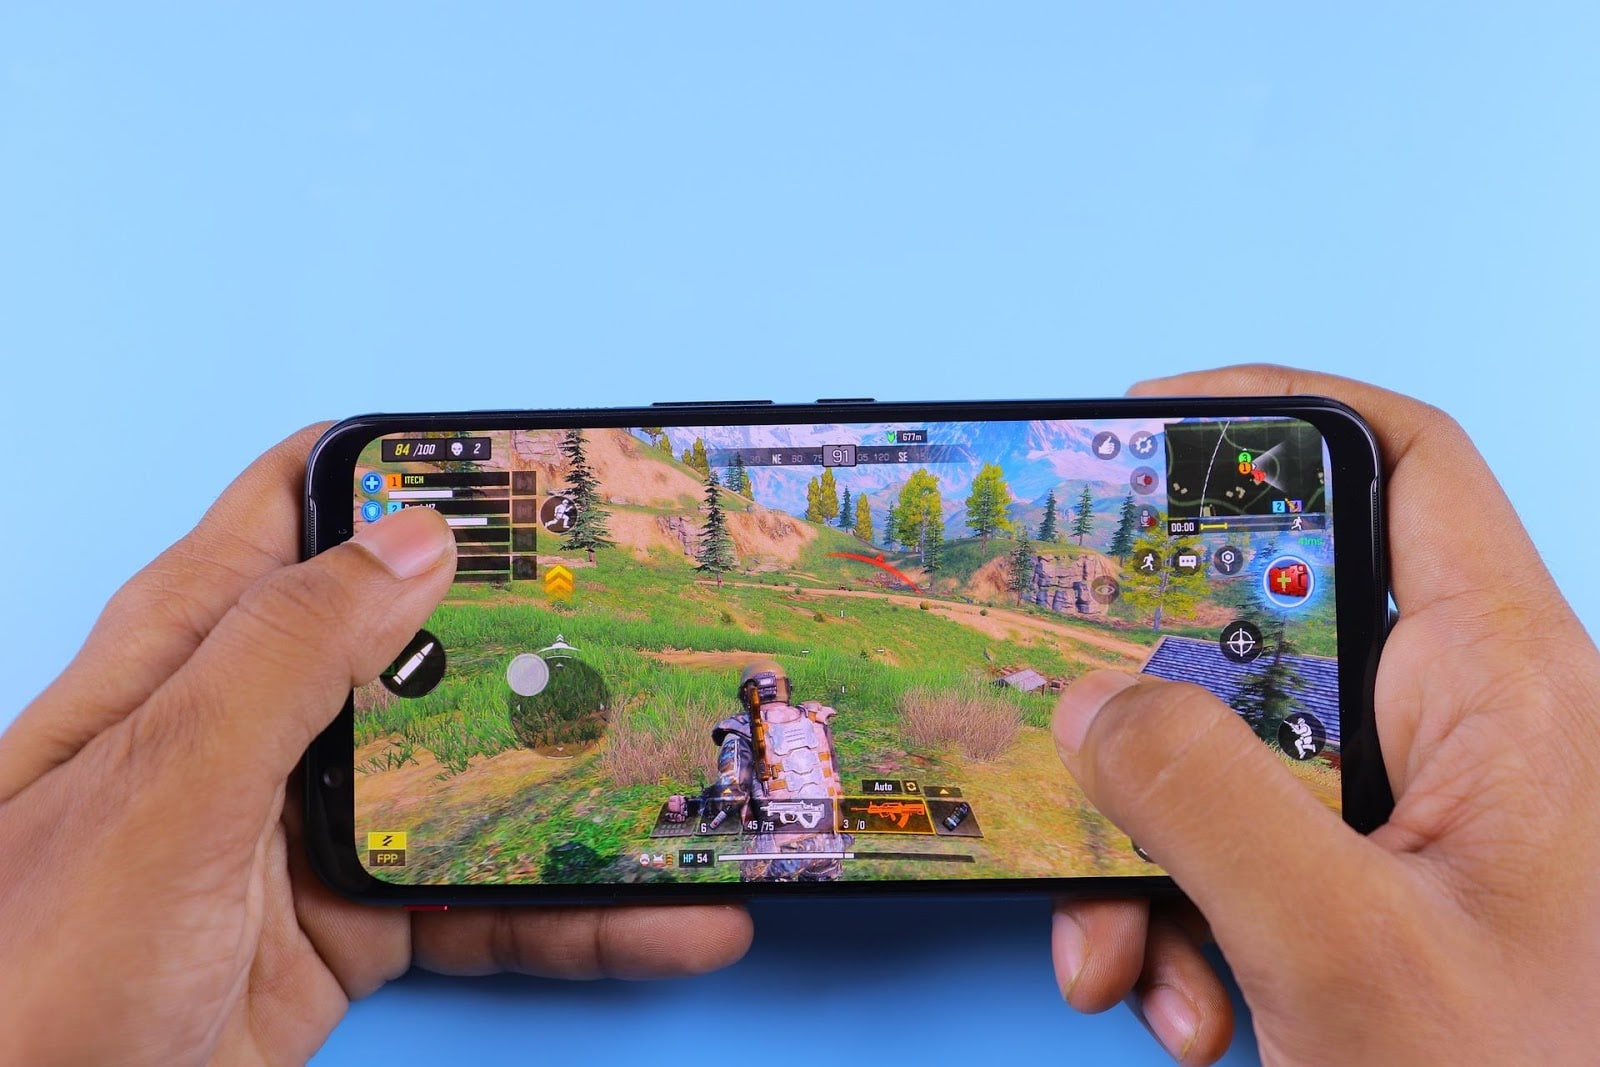 Build High-quality Games With These Top Mobile Game Engines